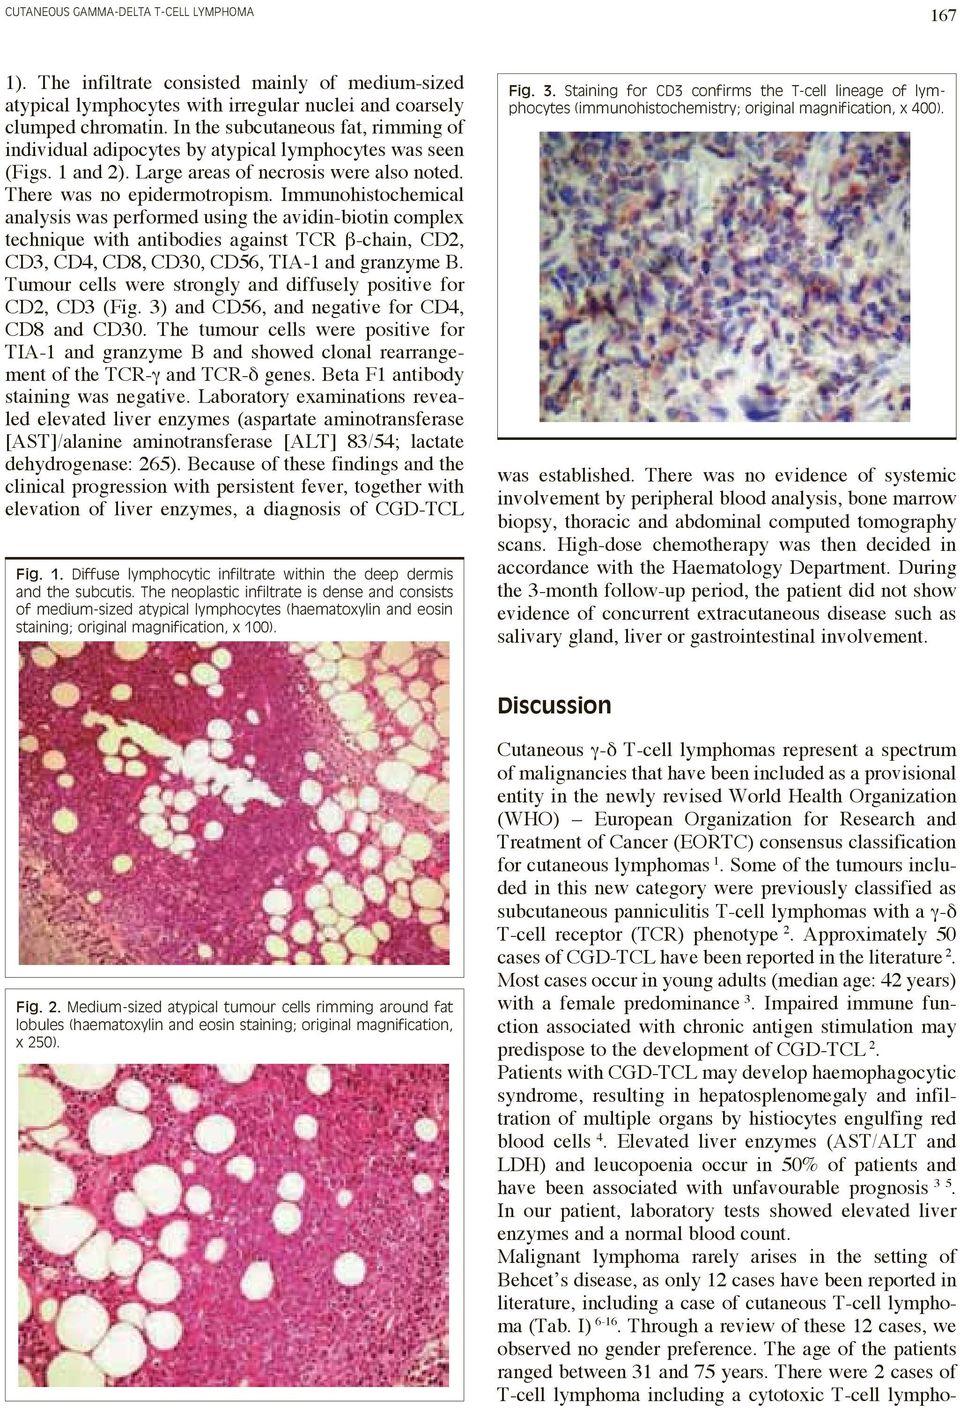 Immunohistochemical analysis was performed using the avidin-biotin complex technique with antibodies against TCR β-chain, CD2, CD3, CD4, CD8, CD30, CD56, TIA-1 and granzyme B.